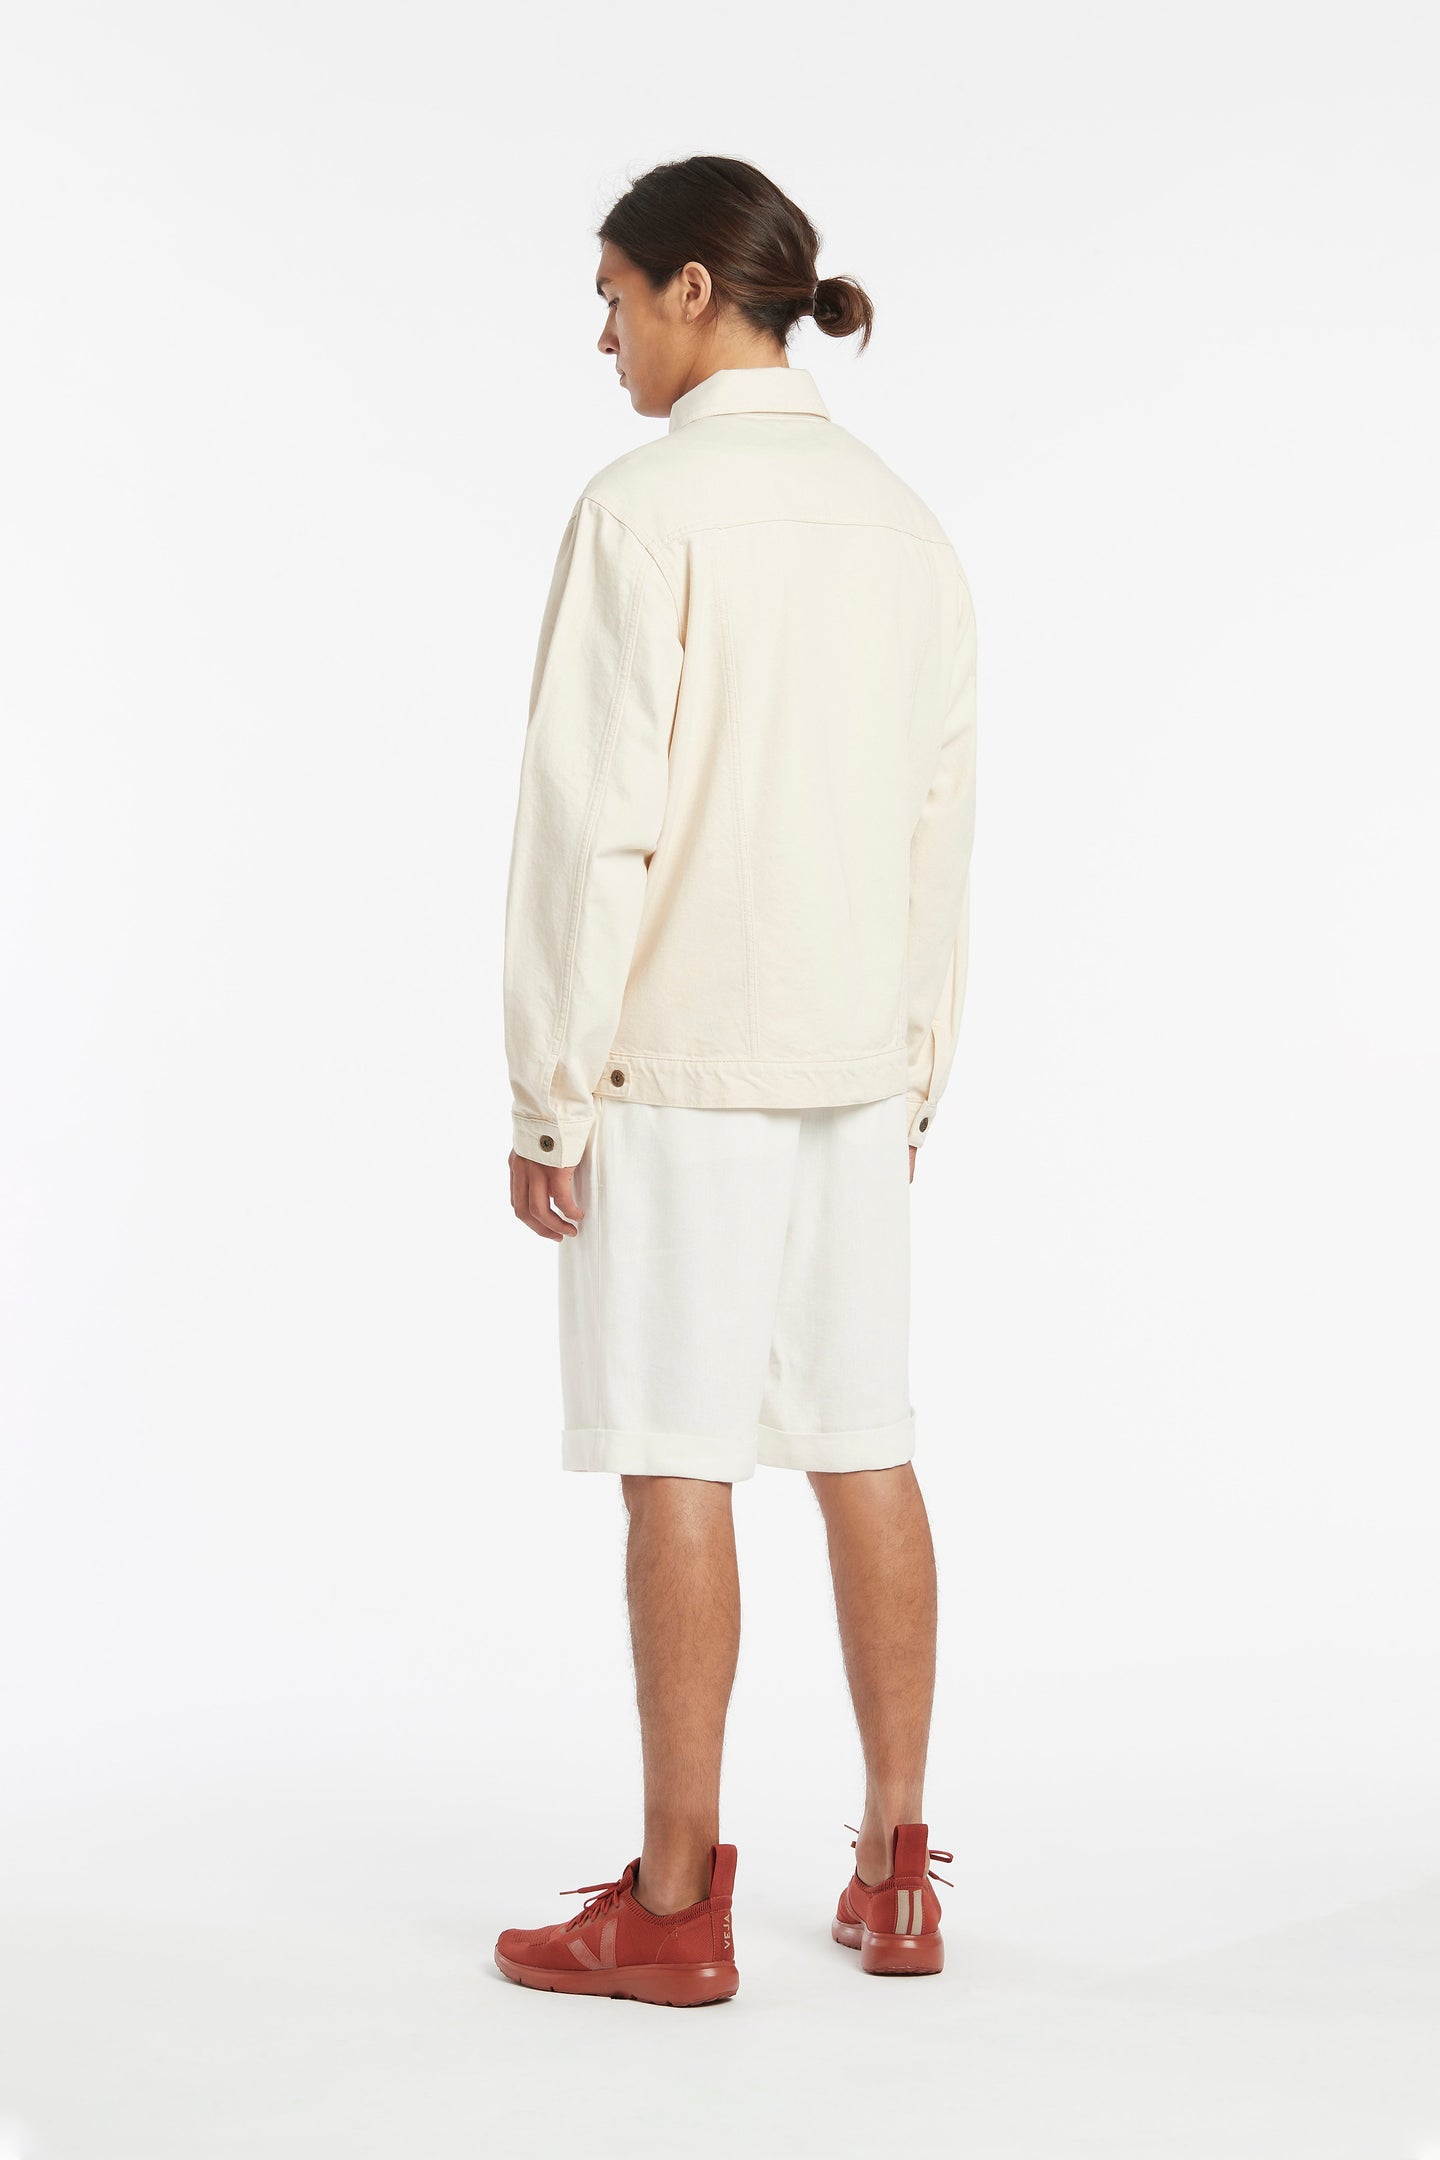 SIR the label CLEMENT SHORT IVORY